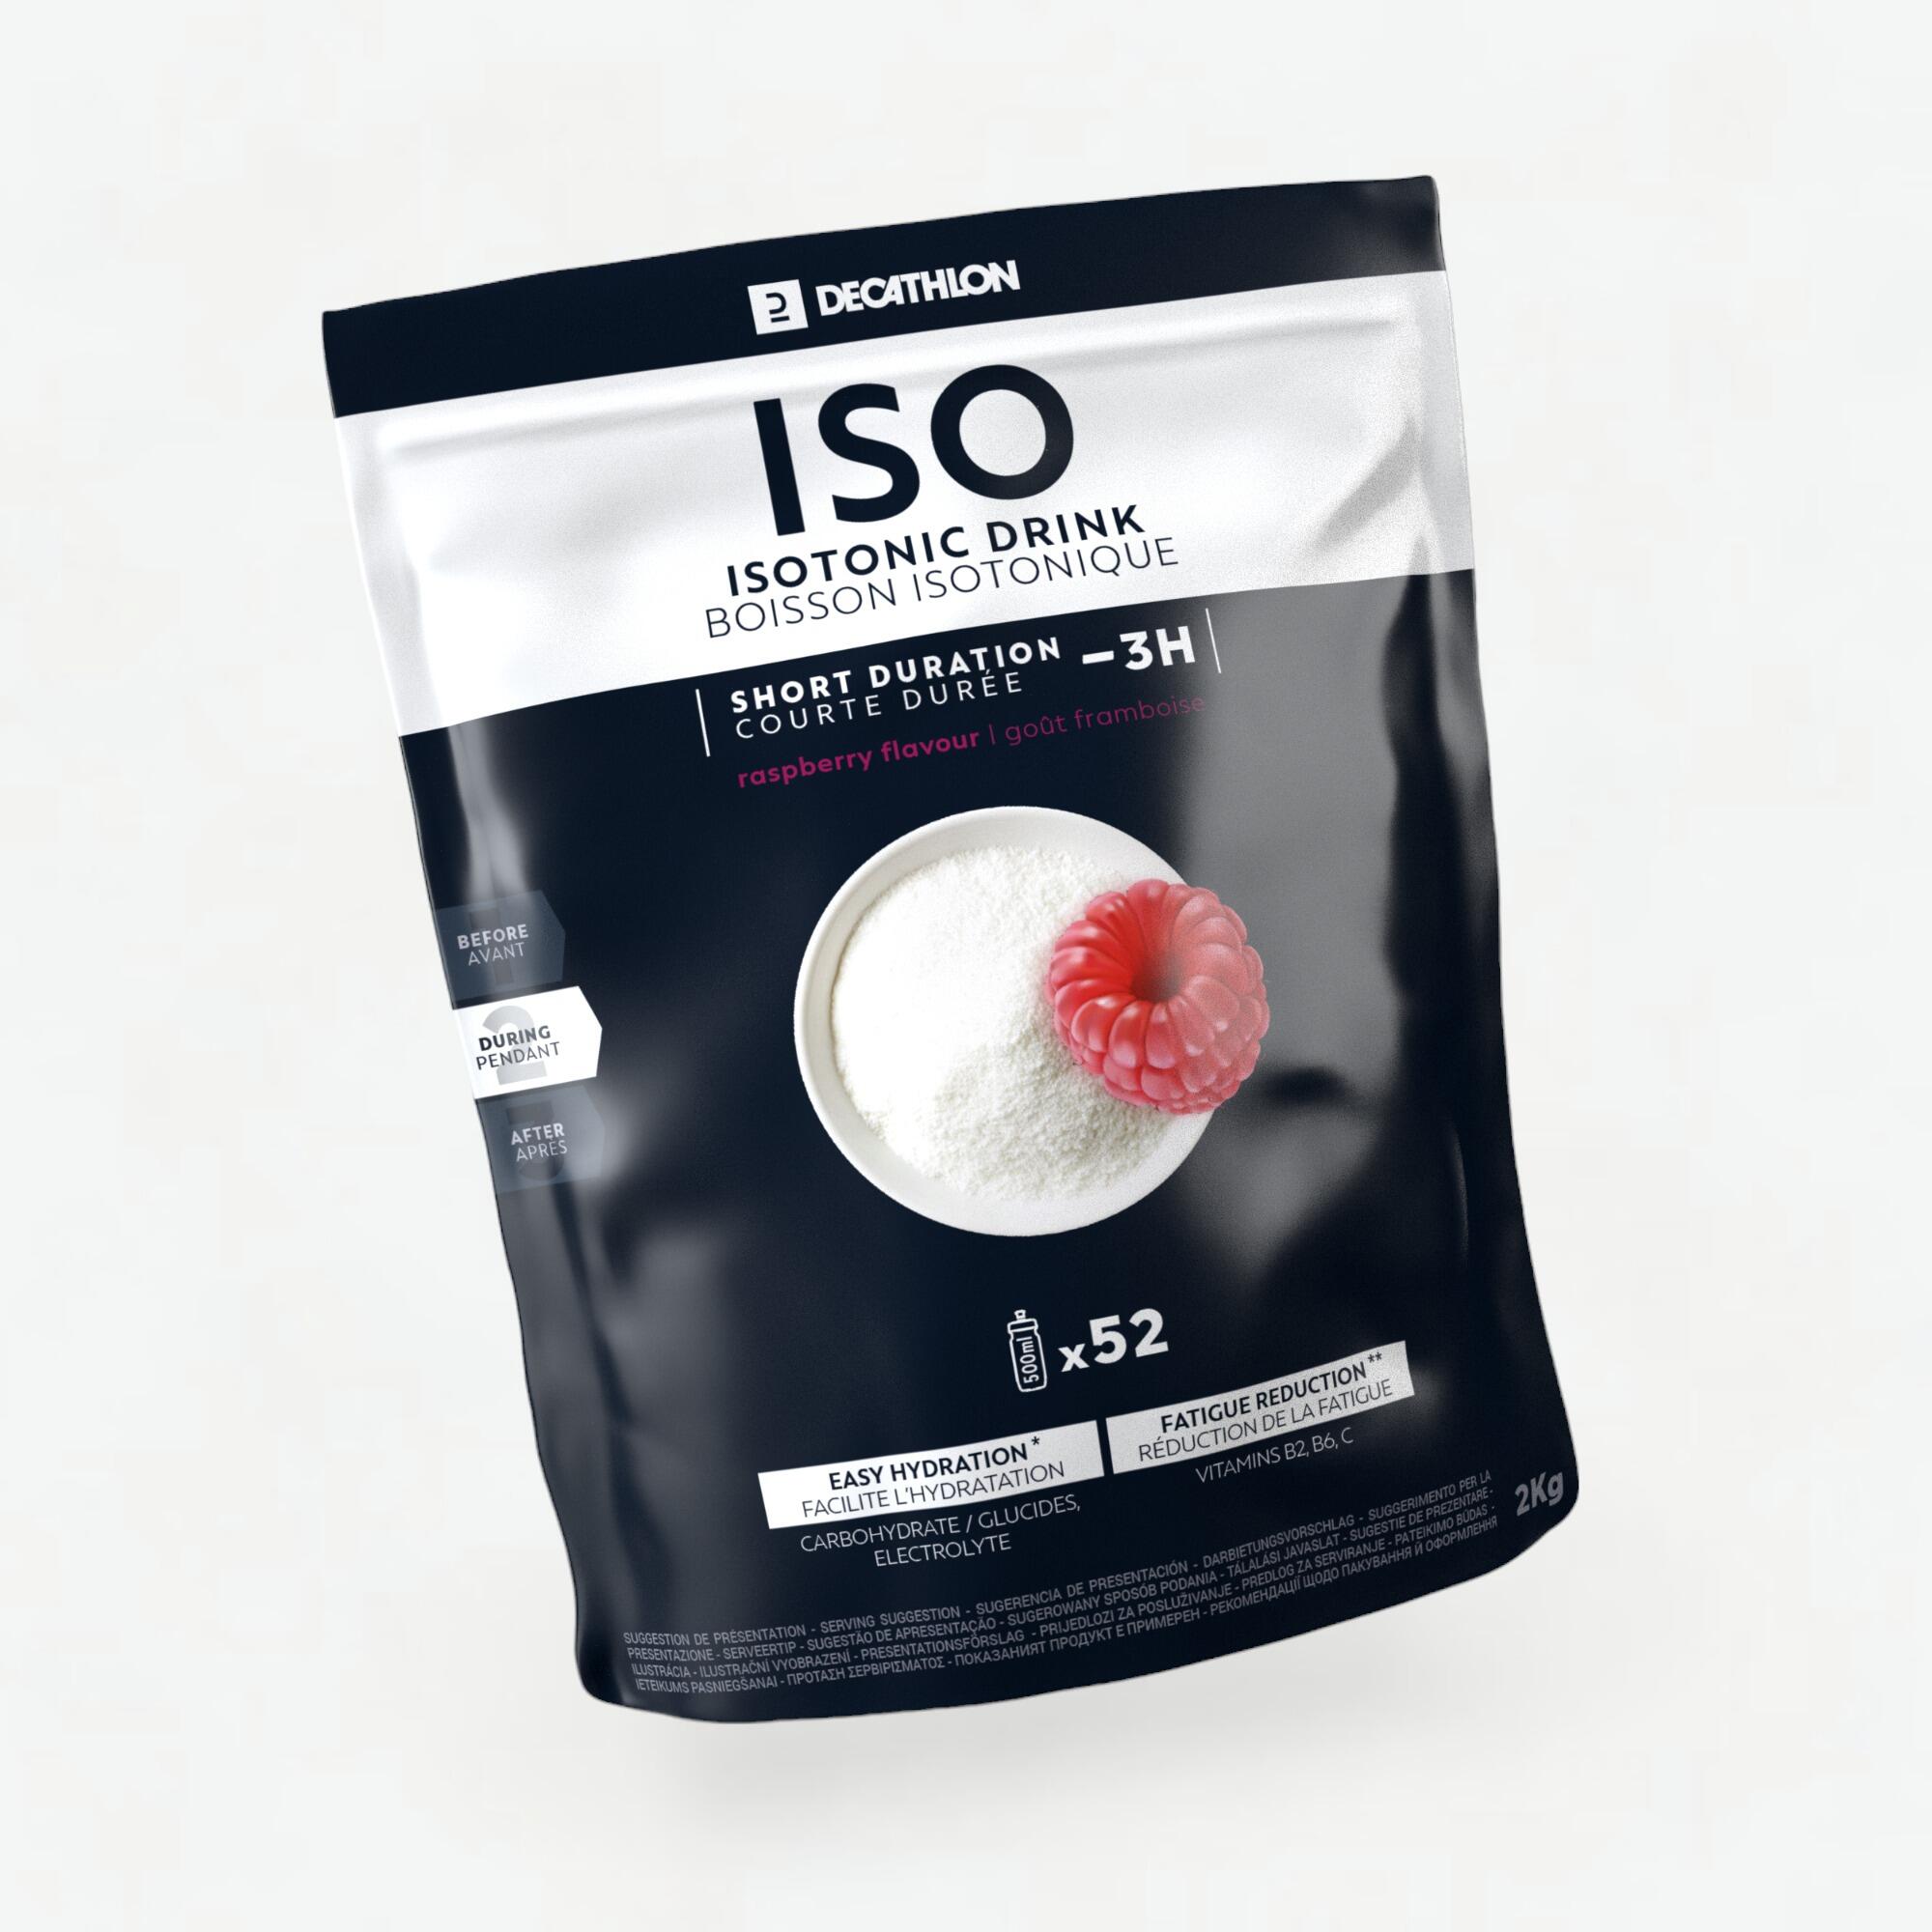 Iso Isotonic Drink Powder 2kg - Mixed Berries 1/3